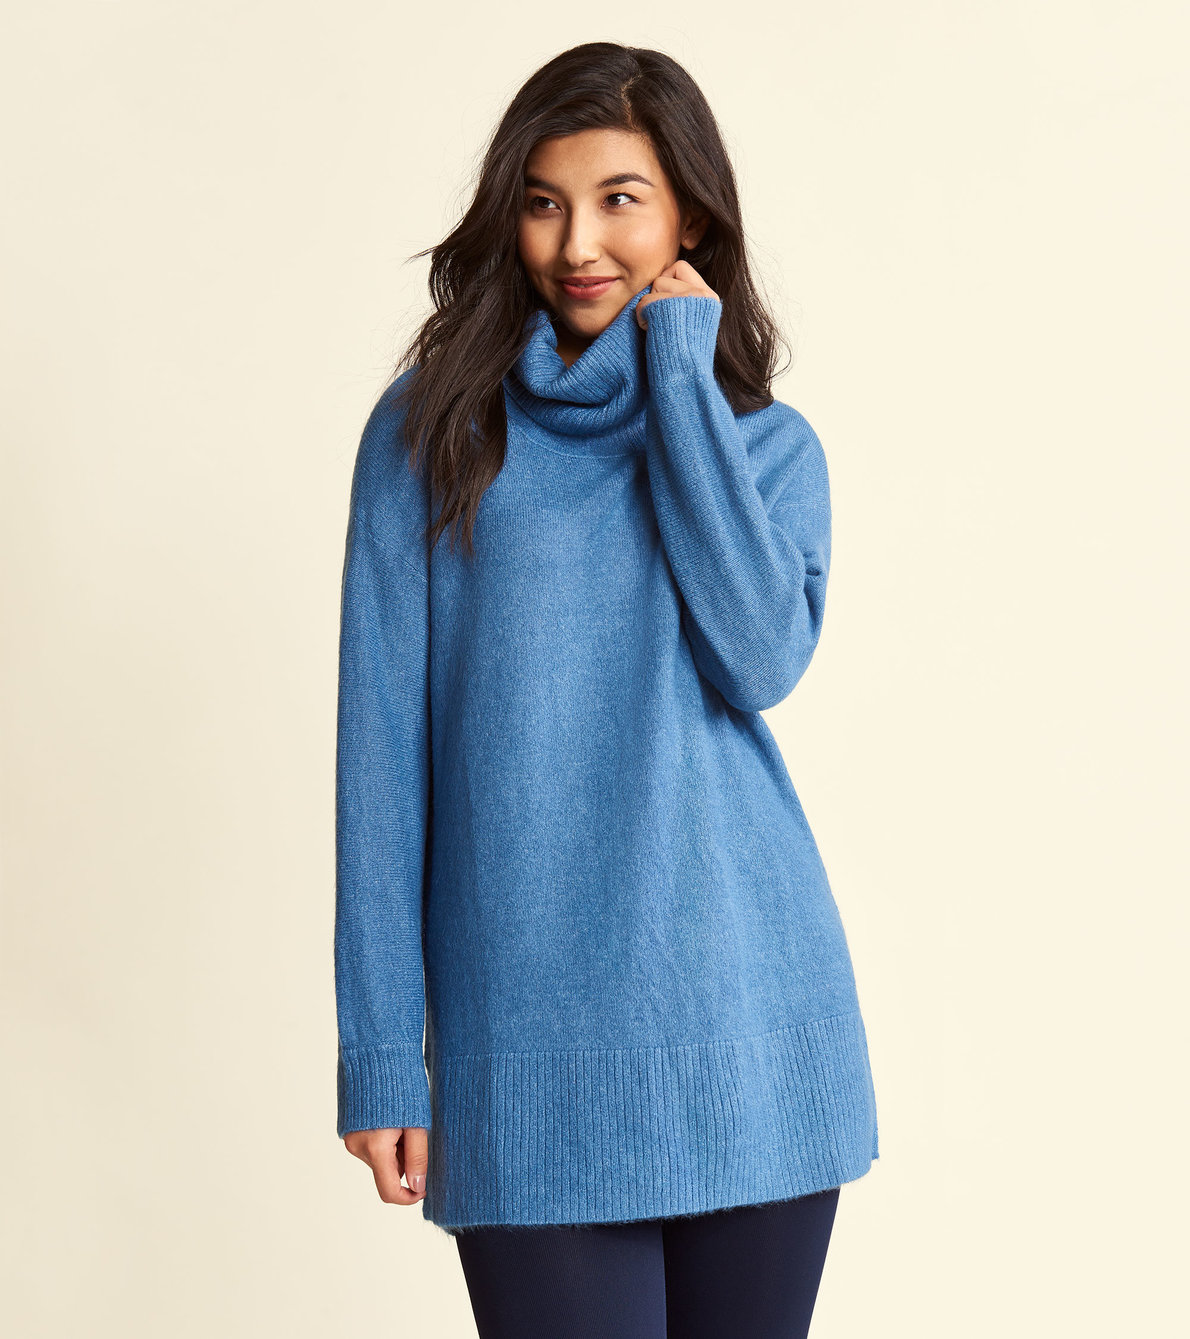 View larger image of Hallie Sweater Tunic - Dutch Blue